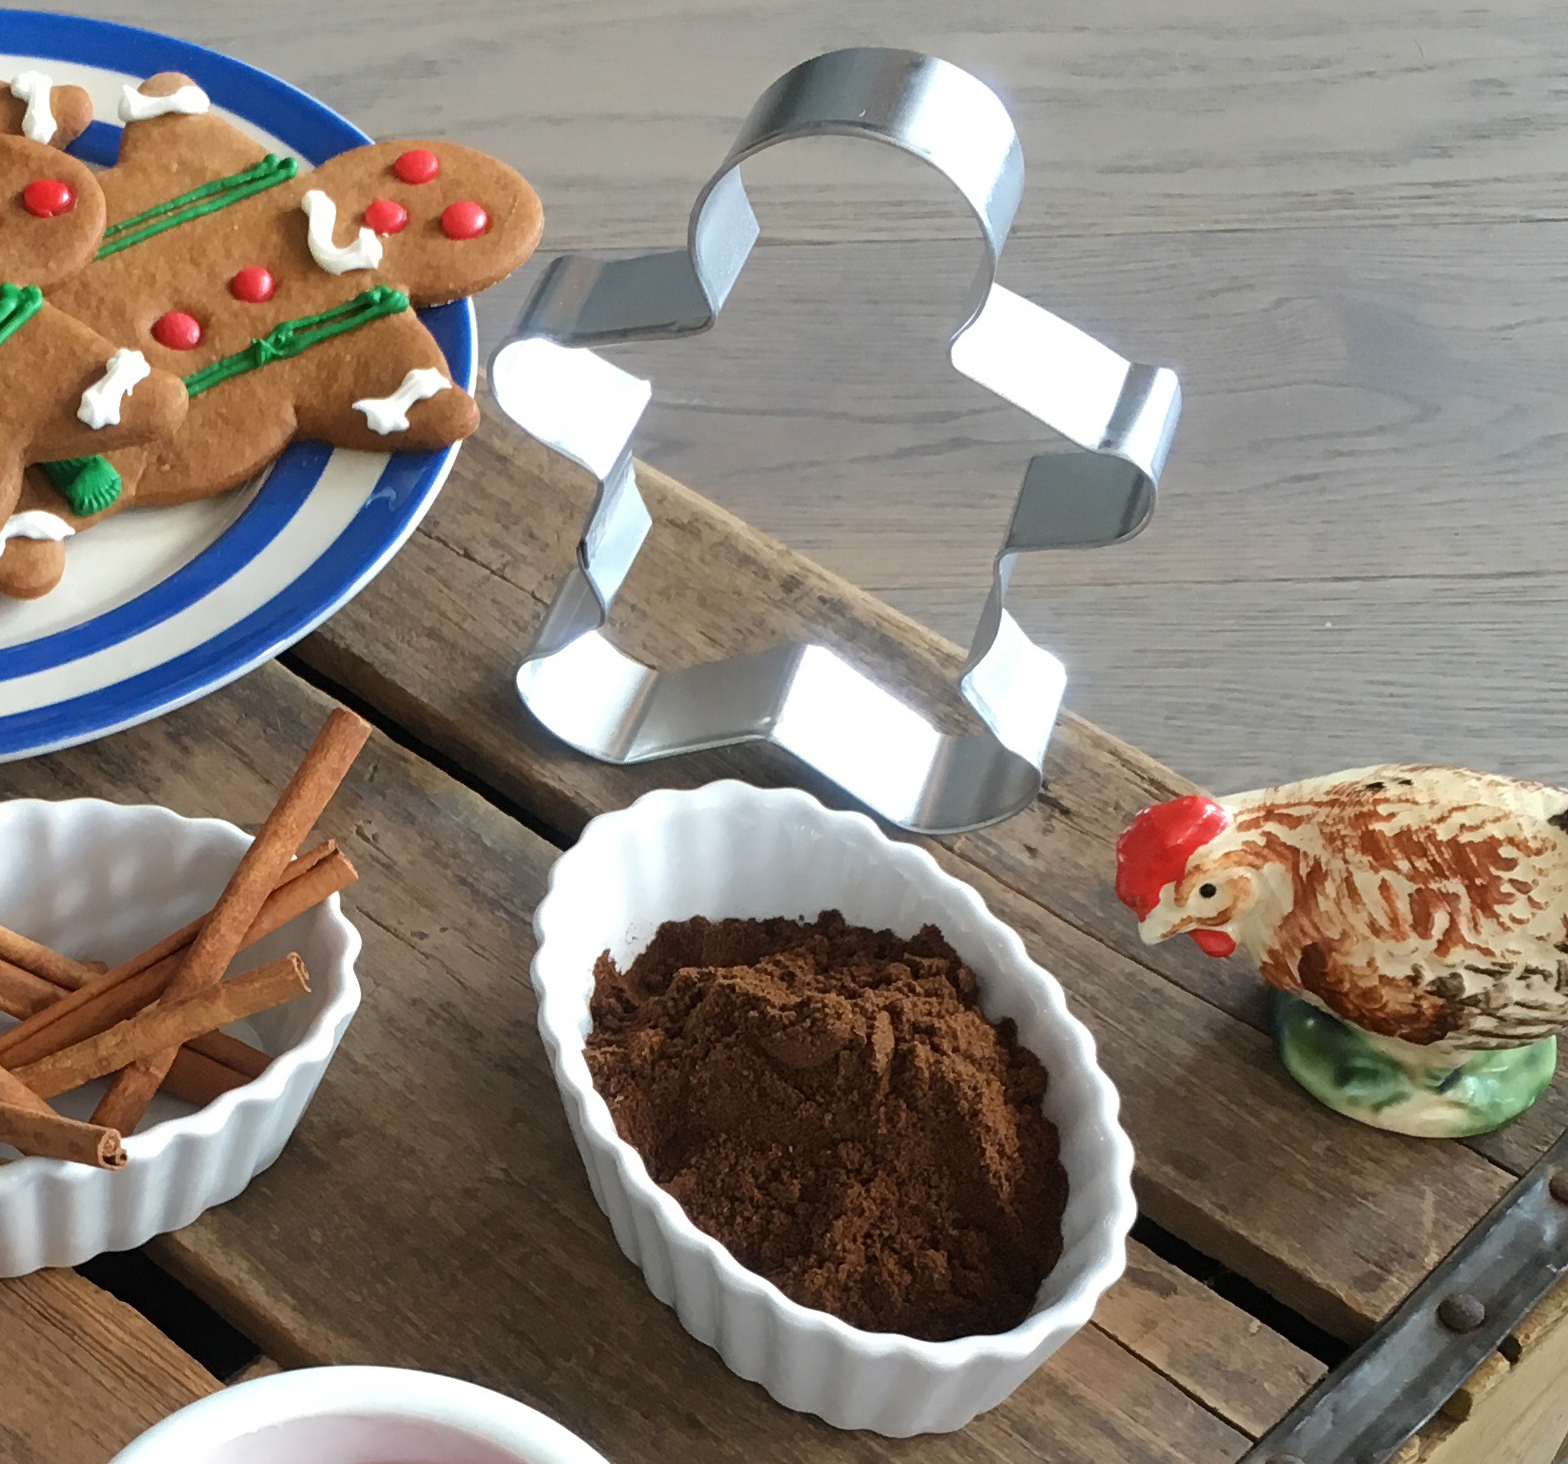 Gingerbread boy cookie cutter from Ginger's Breadboys gingerbread kits